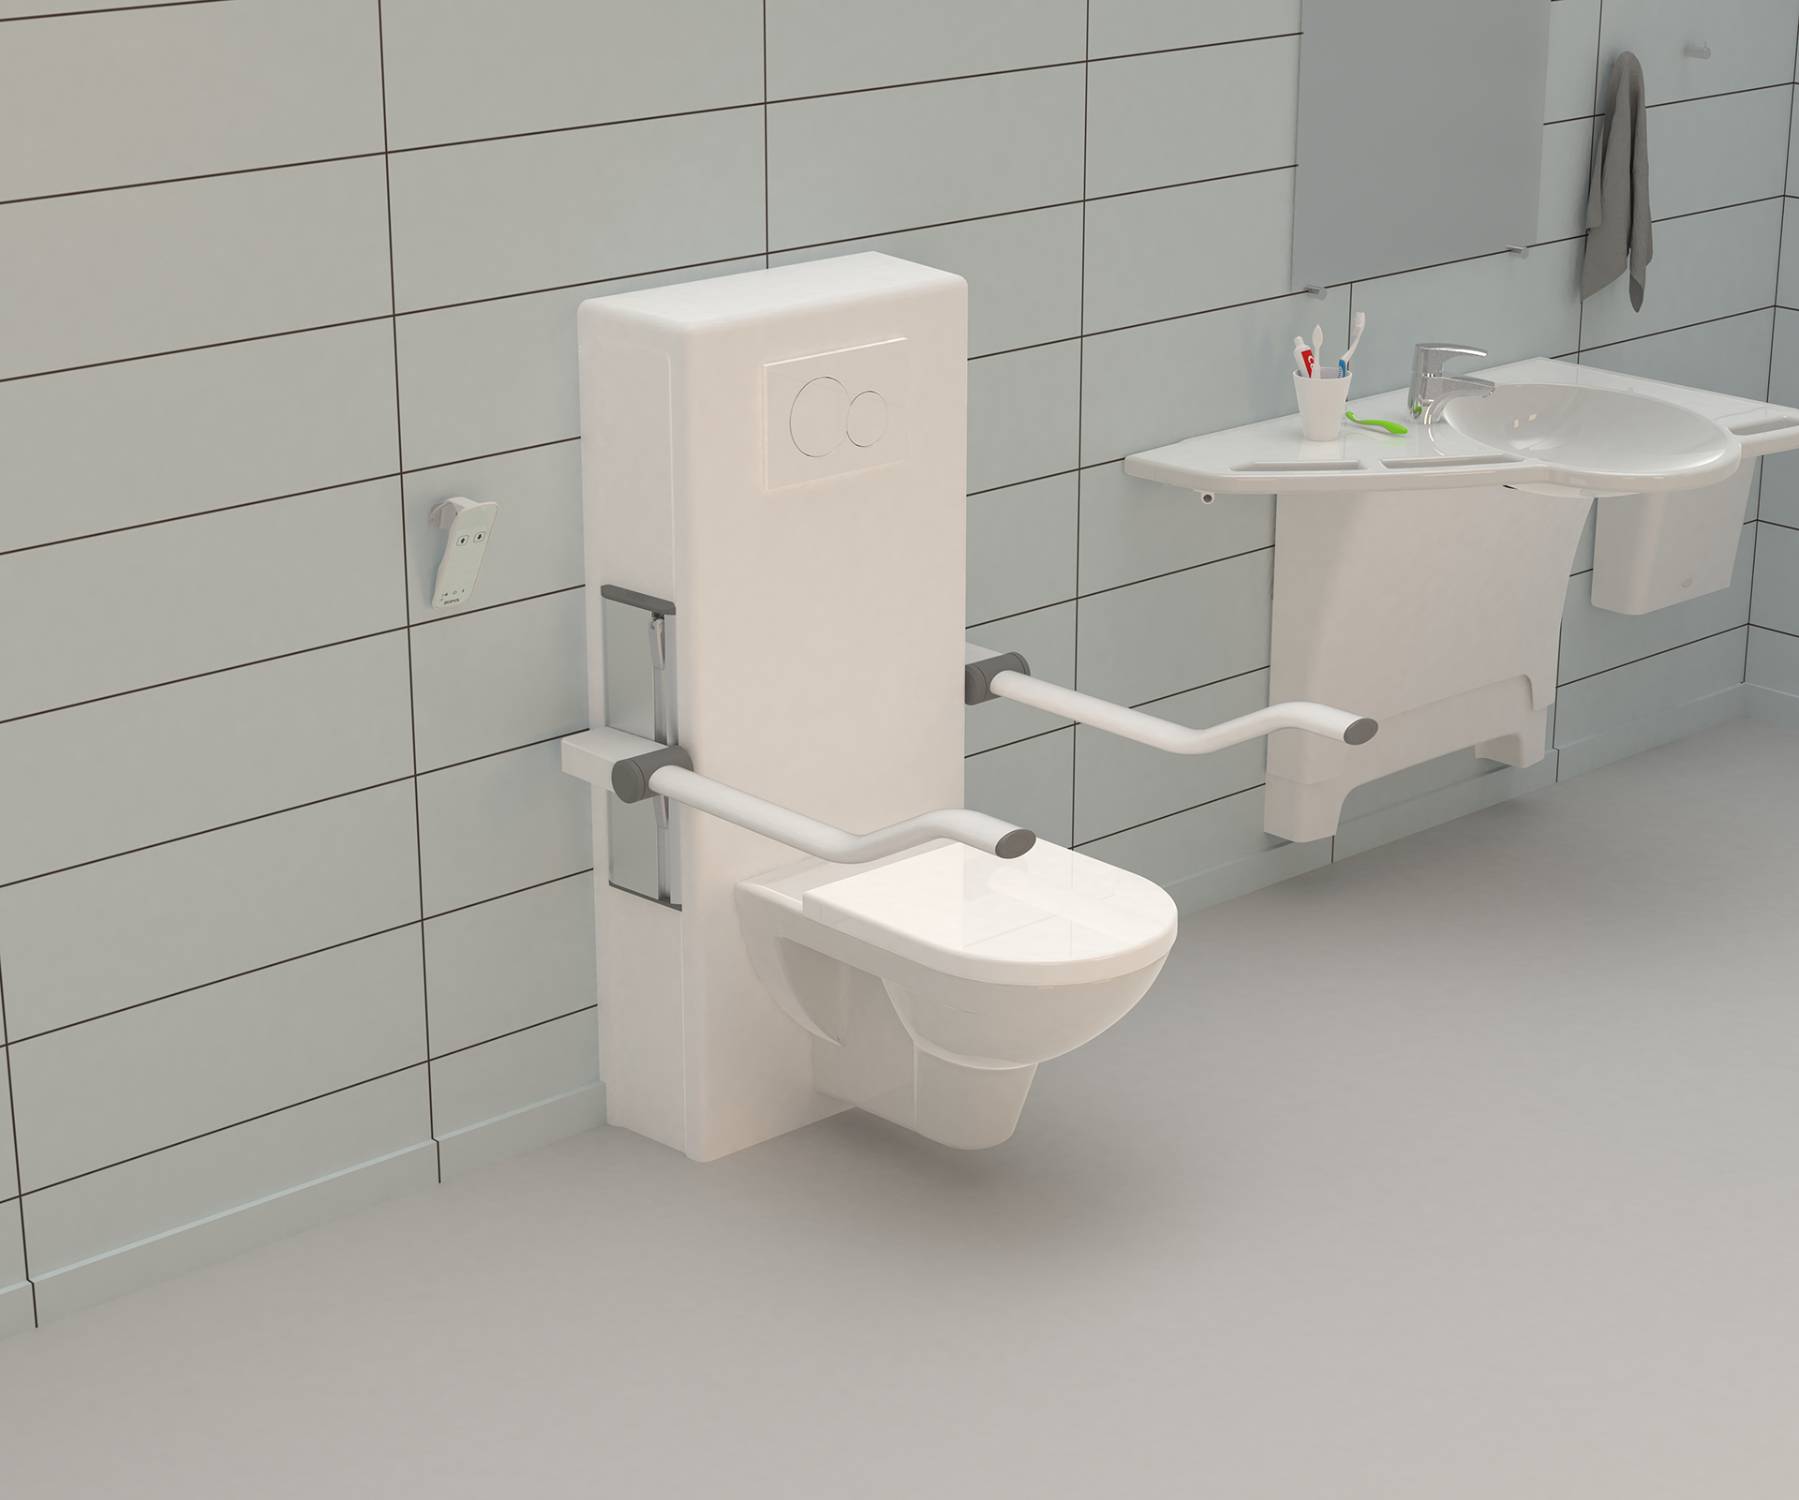 Ropox Electrical Toilet Lifter